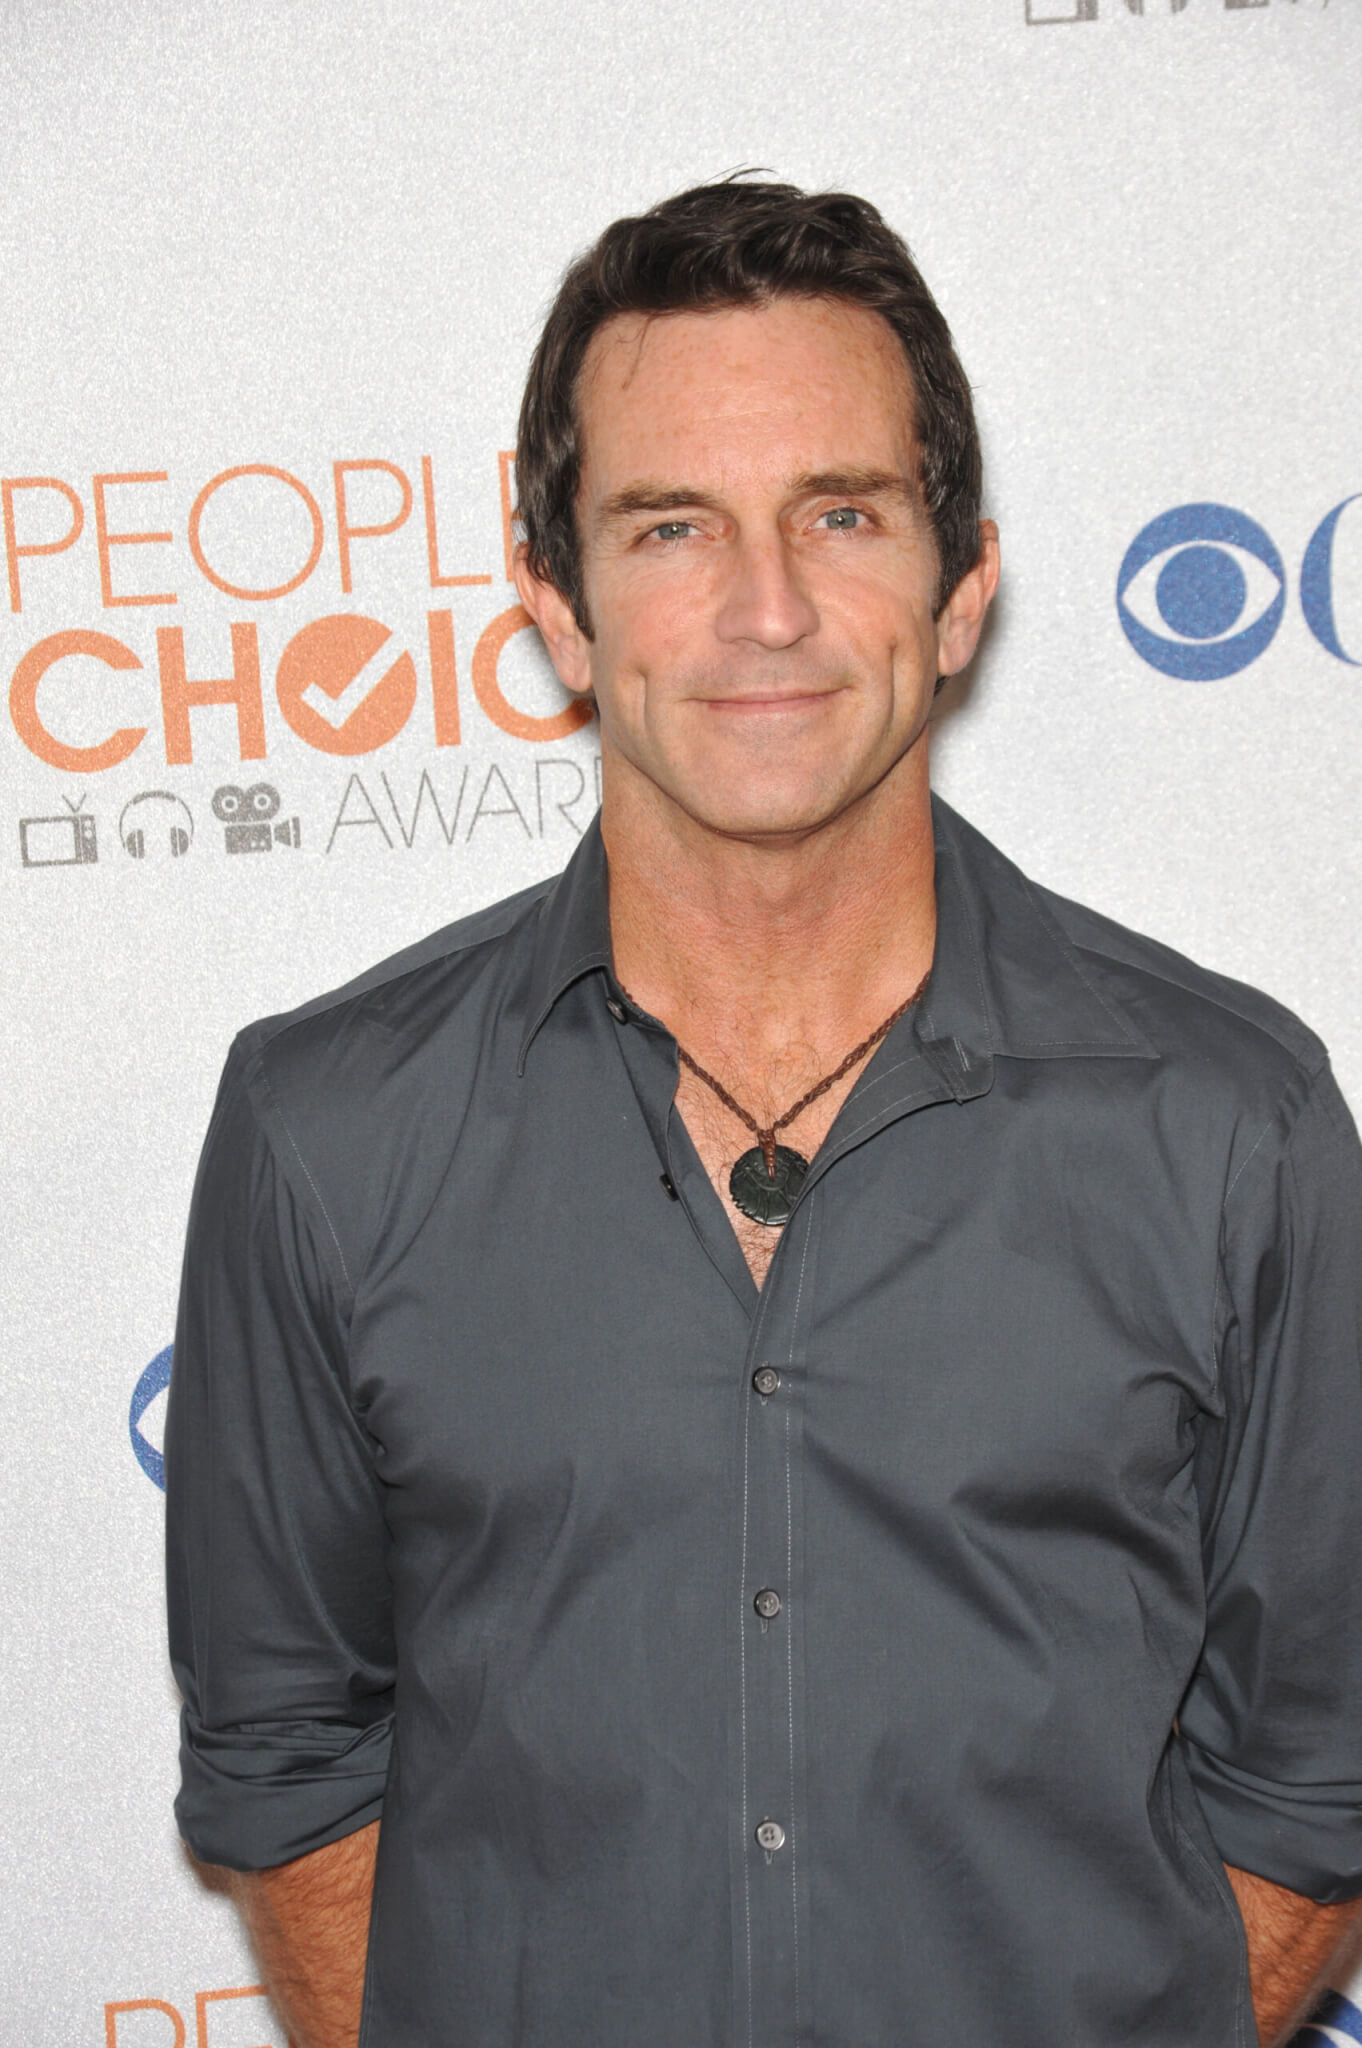 "Survivor" host, Jeff Probst at the 2010 People's Choice Awards 